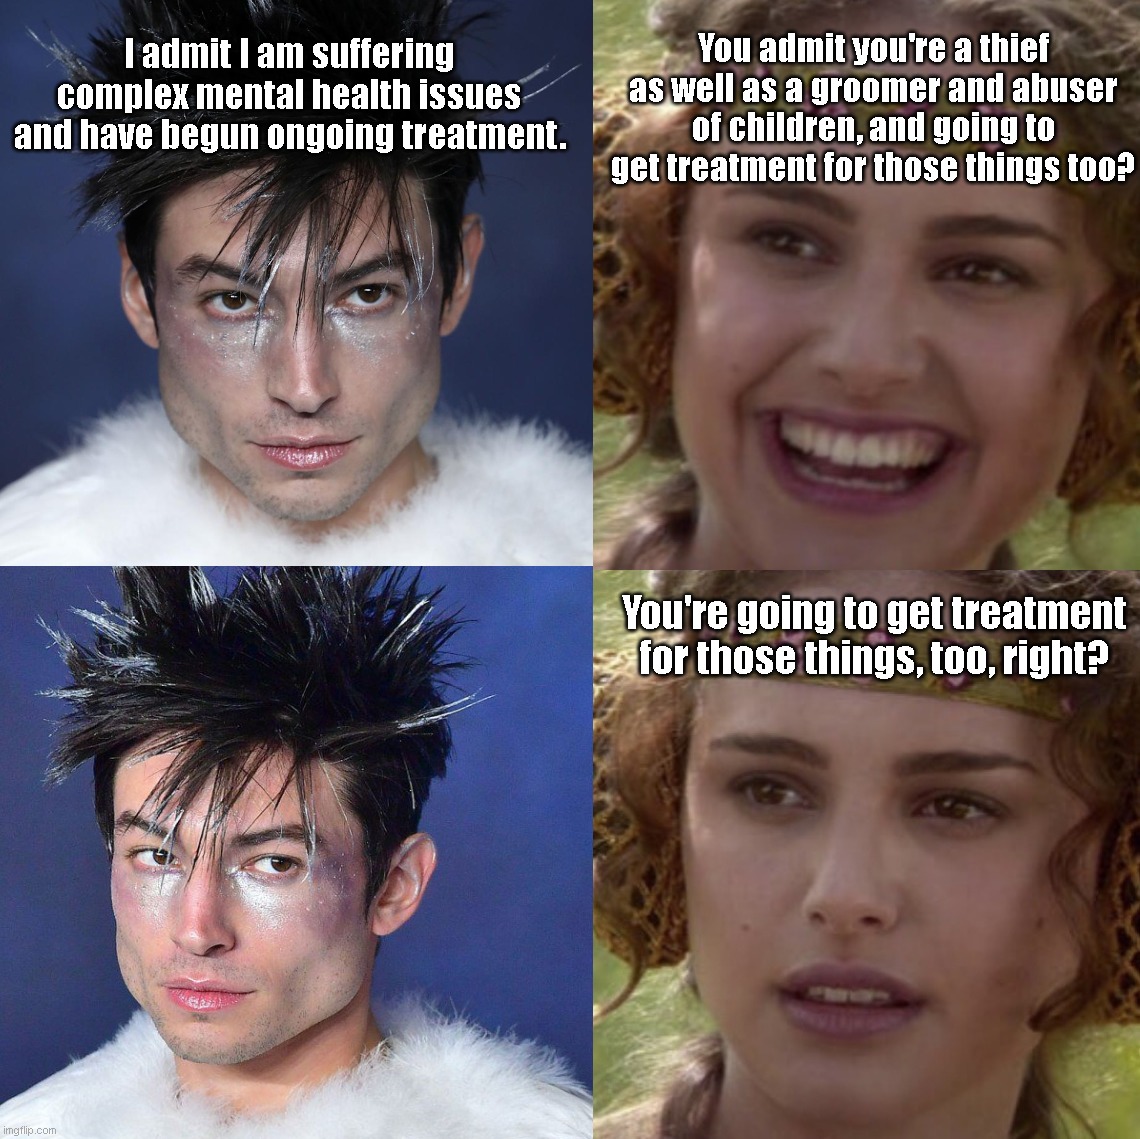 Poor little LGBTQ darling Ezra Miller | You admit you're a thief as well as a groomer and abuser of children, and going to get treatment for those things too? I admit I am suffering complex mental health issues and have begun ongoing treatment. You're going to get treatment for those things, too, right? | image tagged in ezra miller,lgbtq,non binary,child abuse,criminal,scumbag hollywood | made w/ Imgflip meme maker